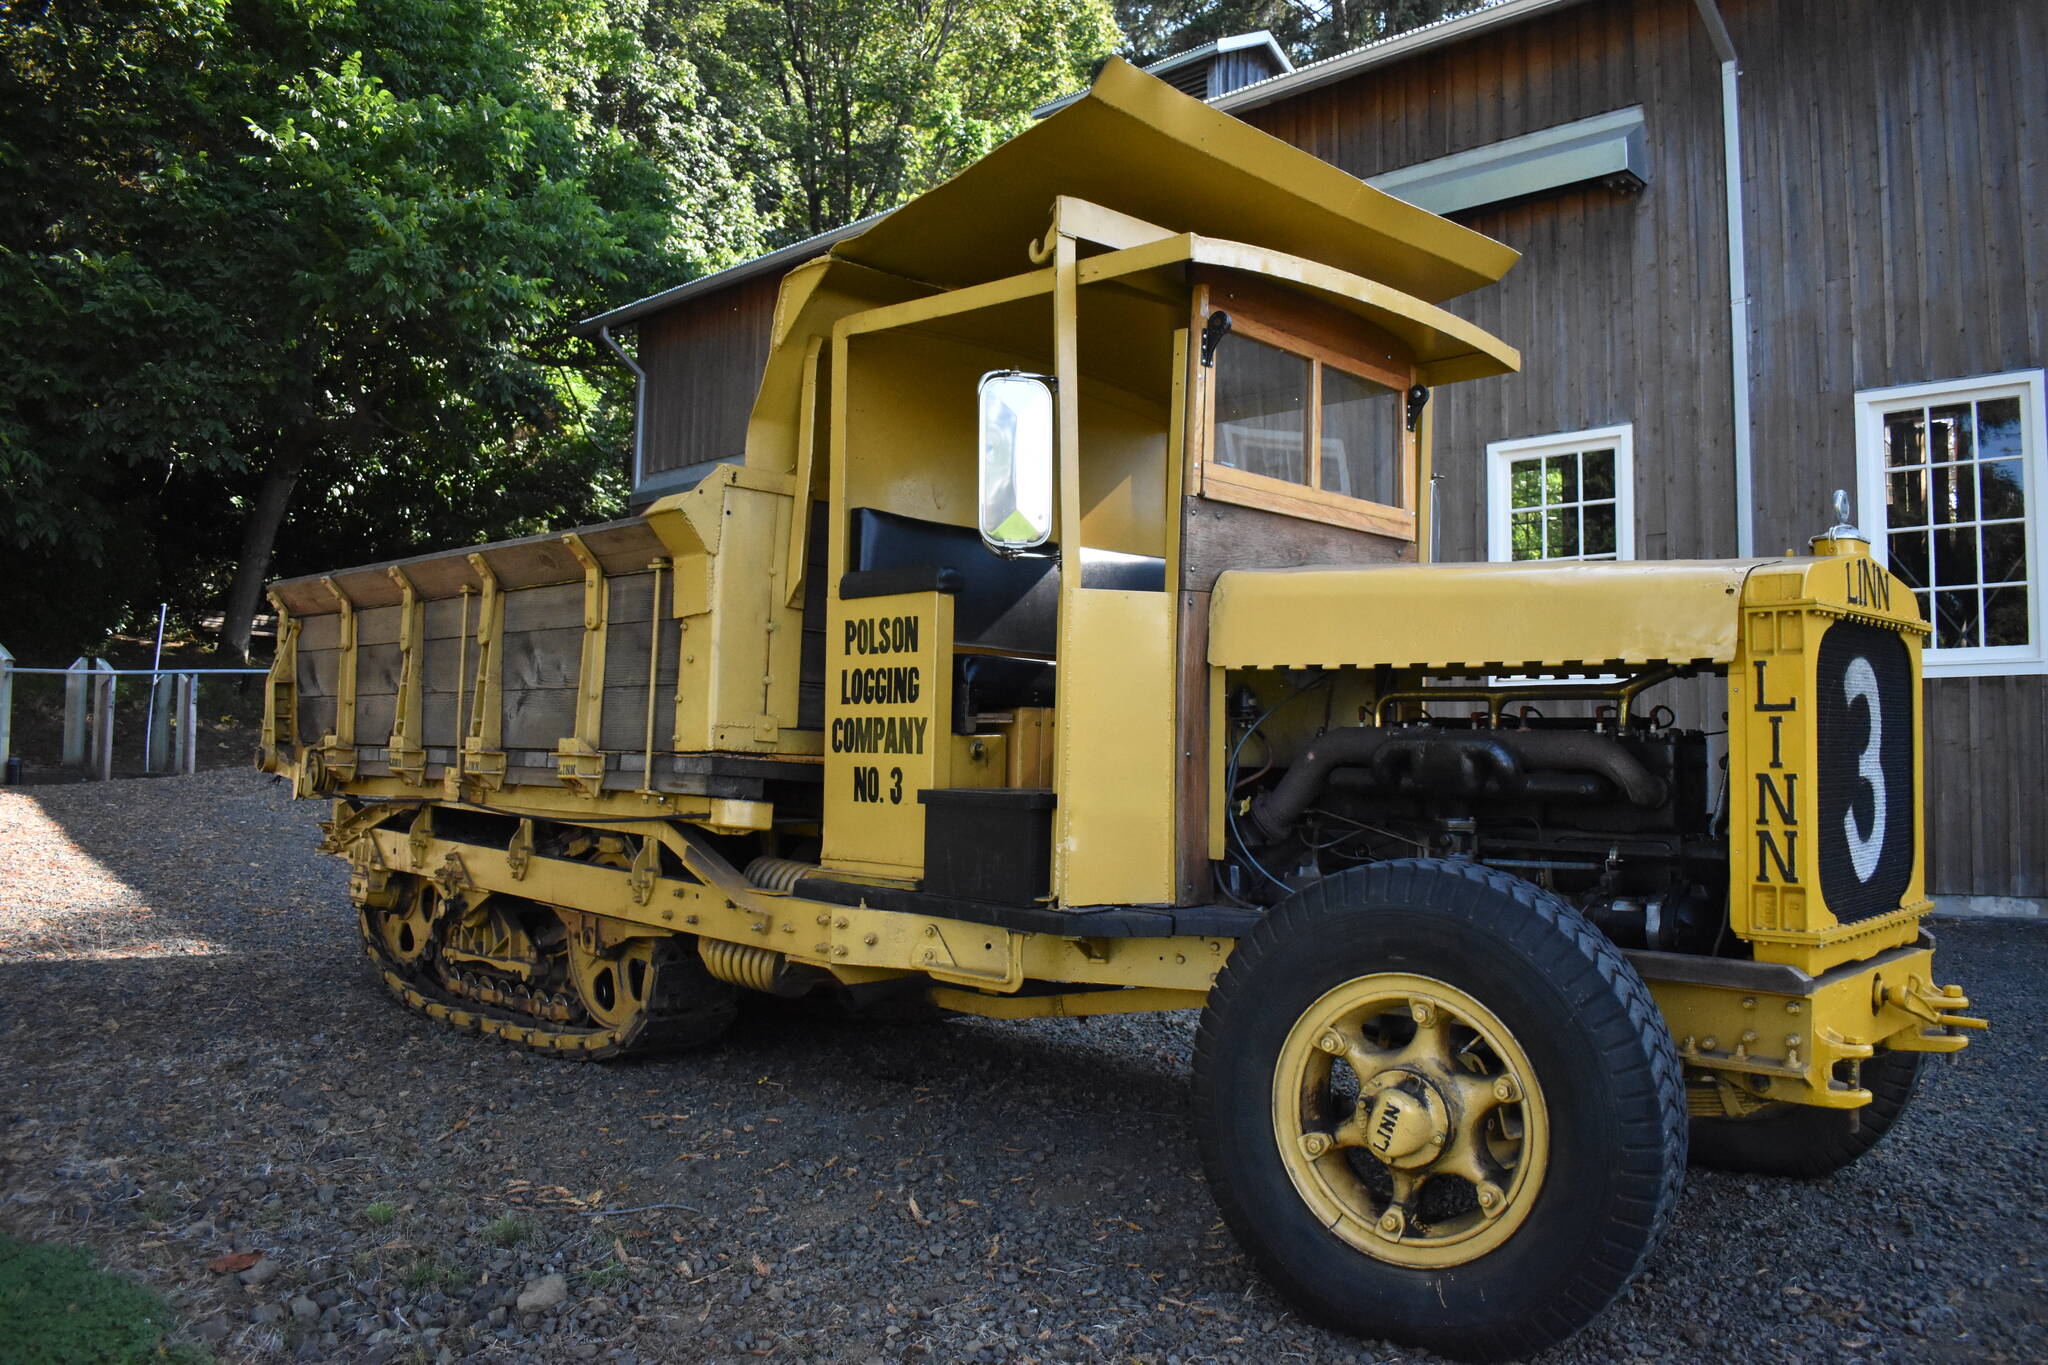 The 1933 Linn Halftrack, which Lee Thomasson helped Lee Wyrick get running again, is on display on the Polson Museum grounds, and will be on display when Thomasson is honored as the 2022 Pioneer of the Year. The yellow tractor was used by Polson Logging Company for building railroad grades.